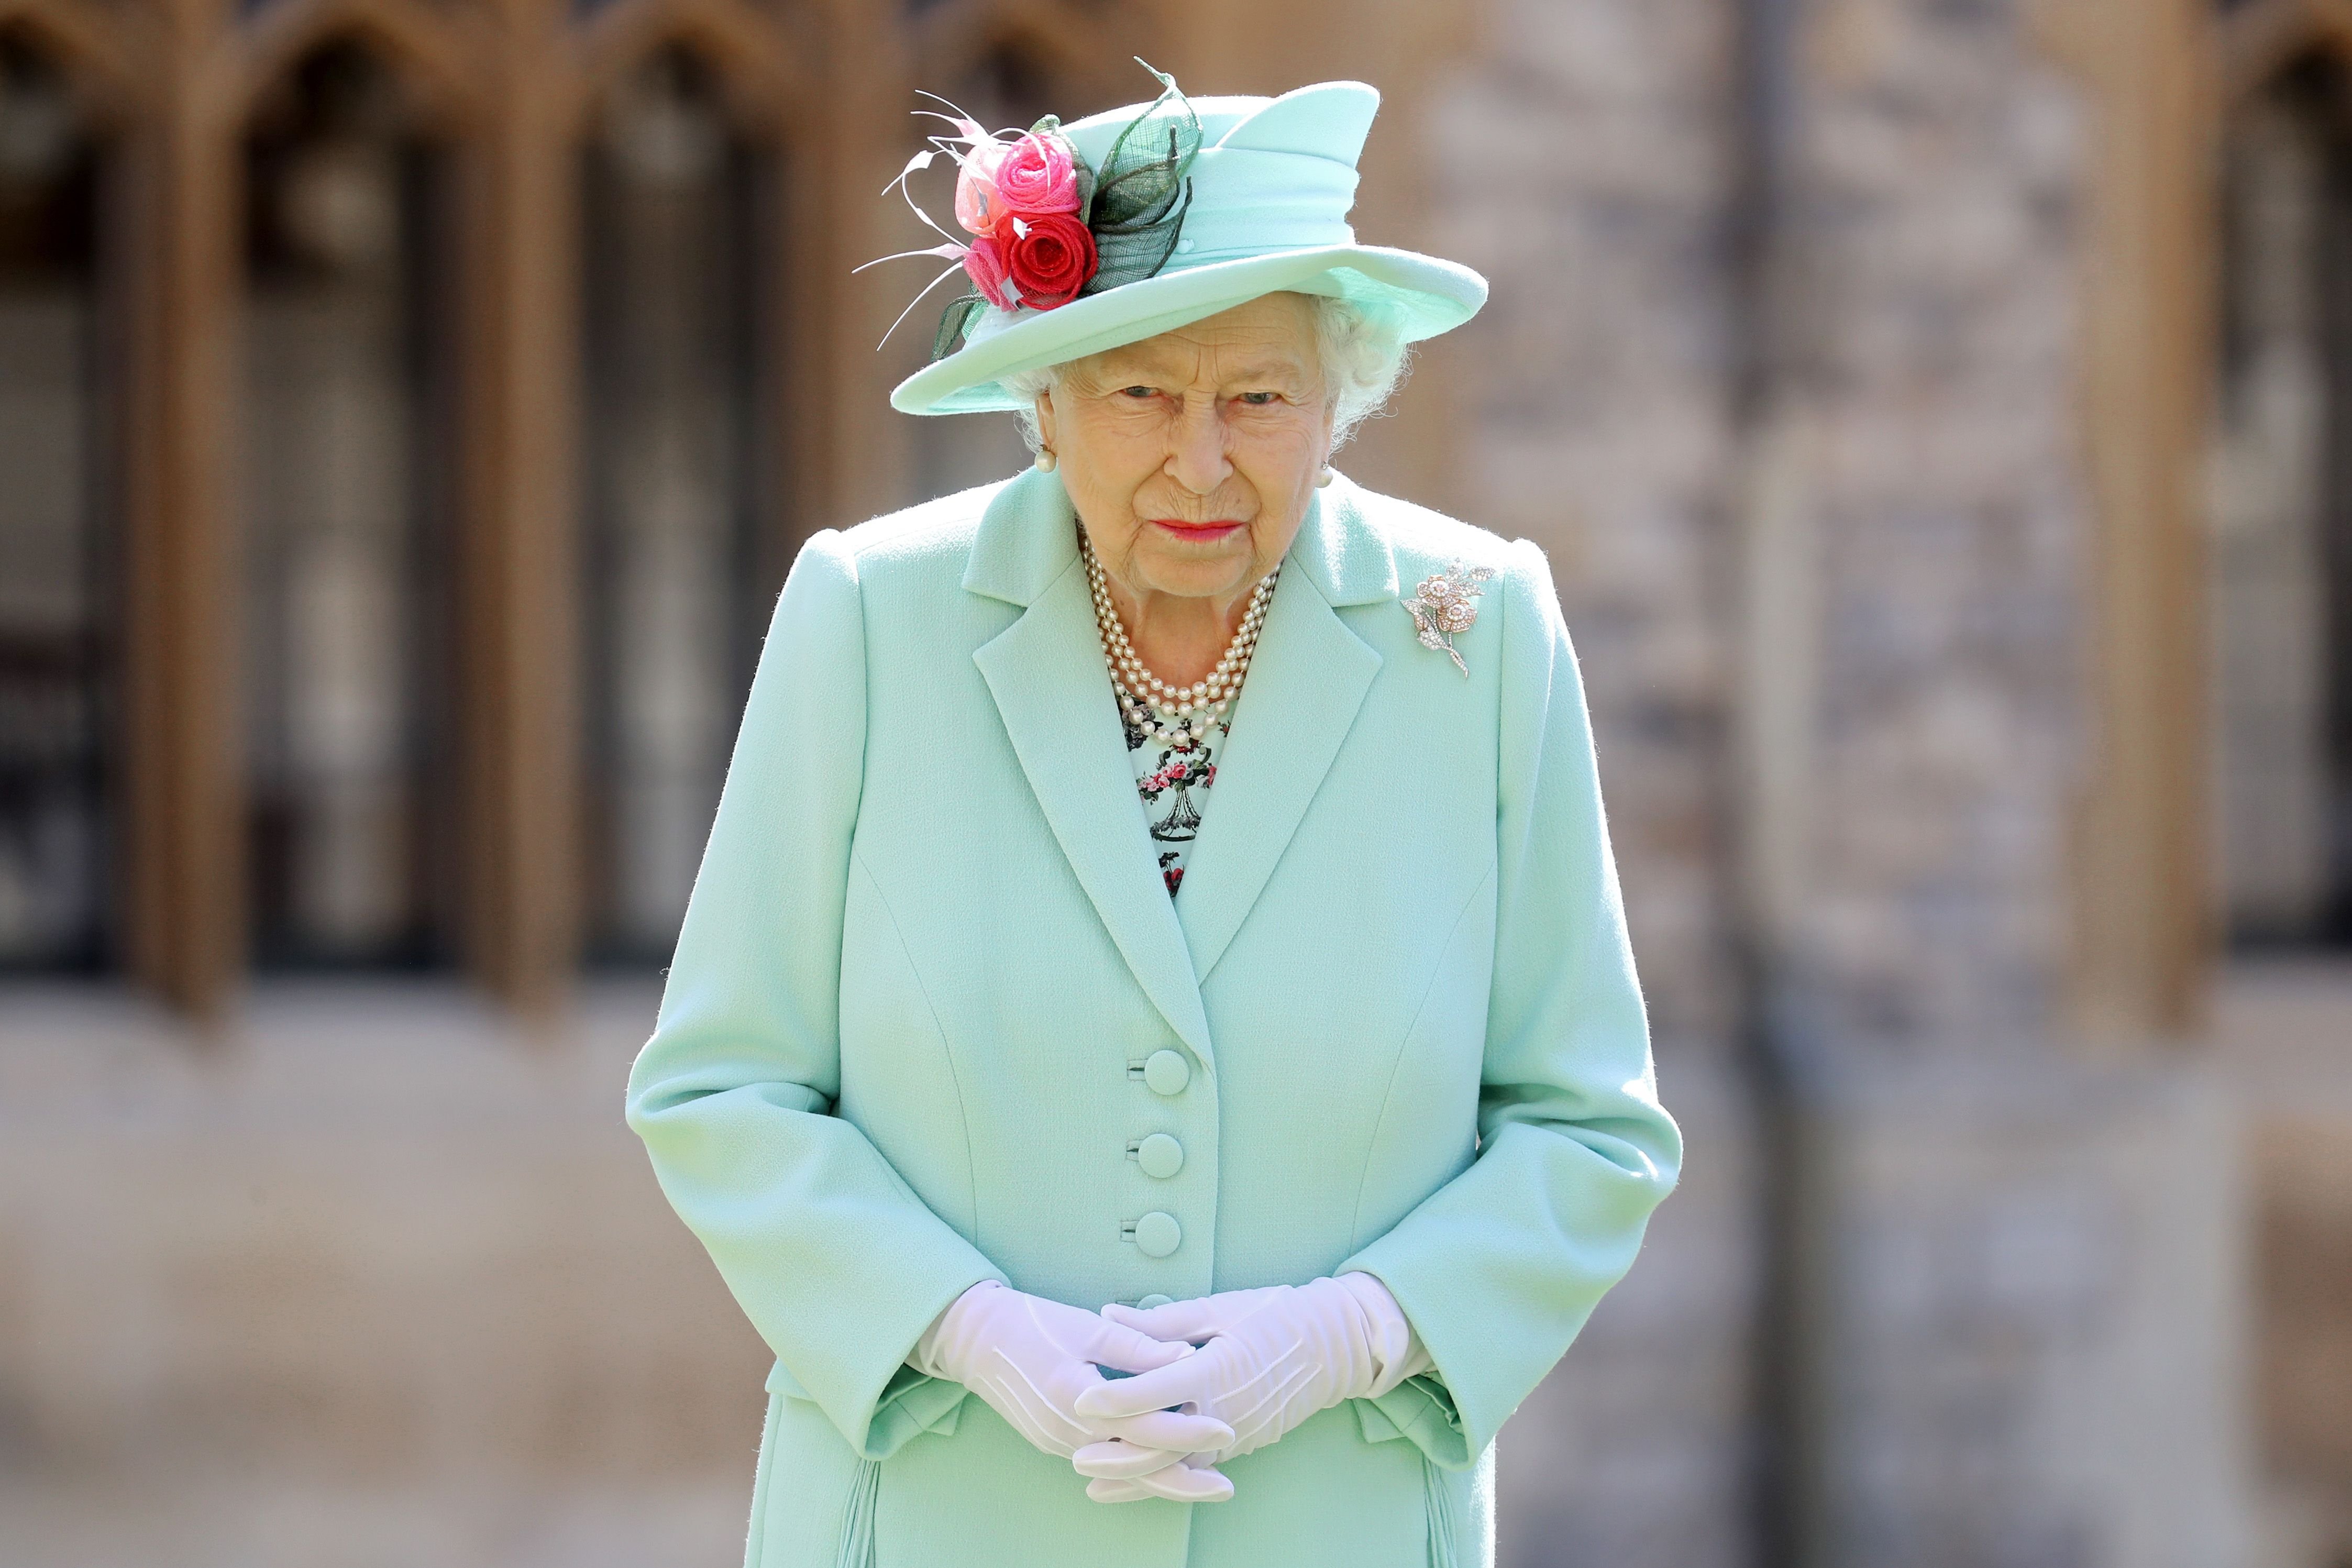 Queen Elizabeth II after awarding Captain Sir Thomas Moore with the insignia of Knight Bachelor at Windsor Castle on July 17, 2020 | Getty Images